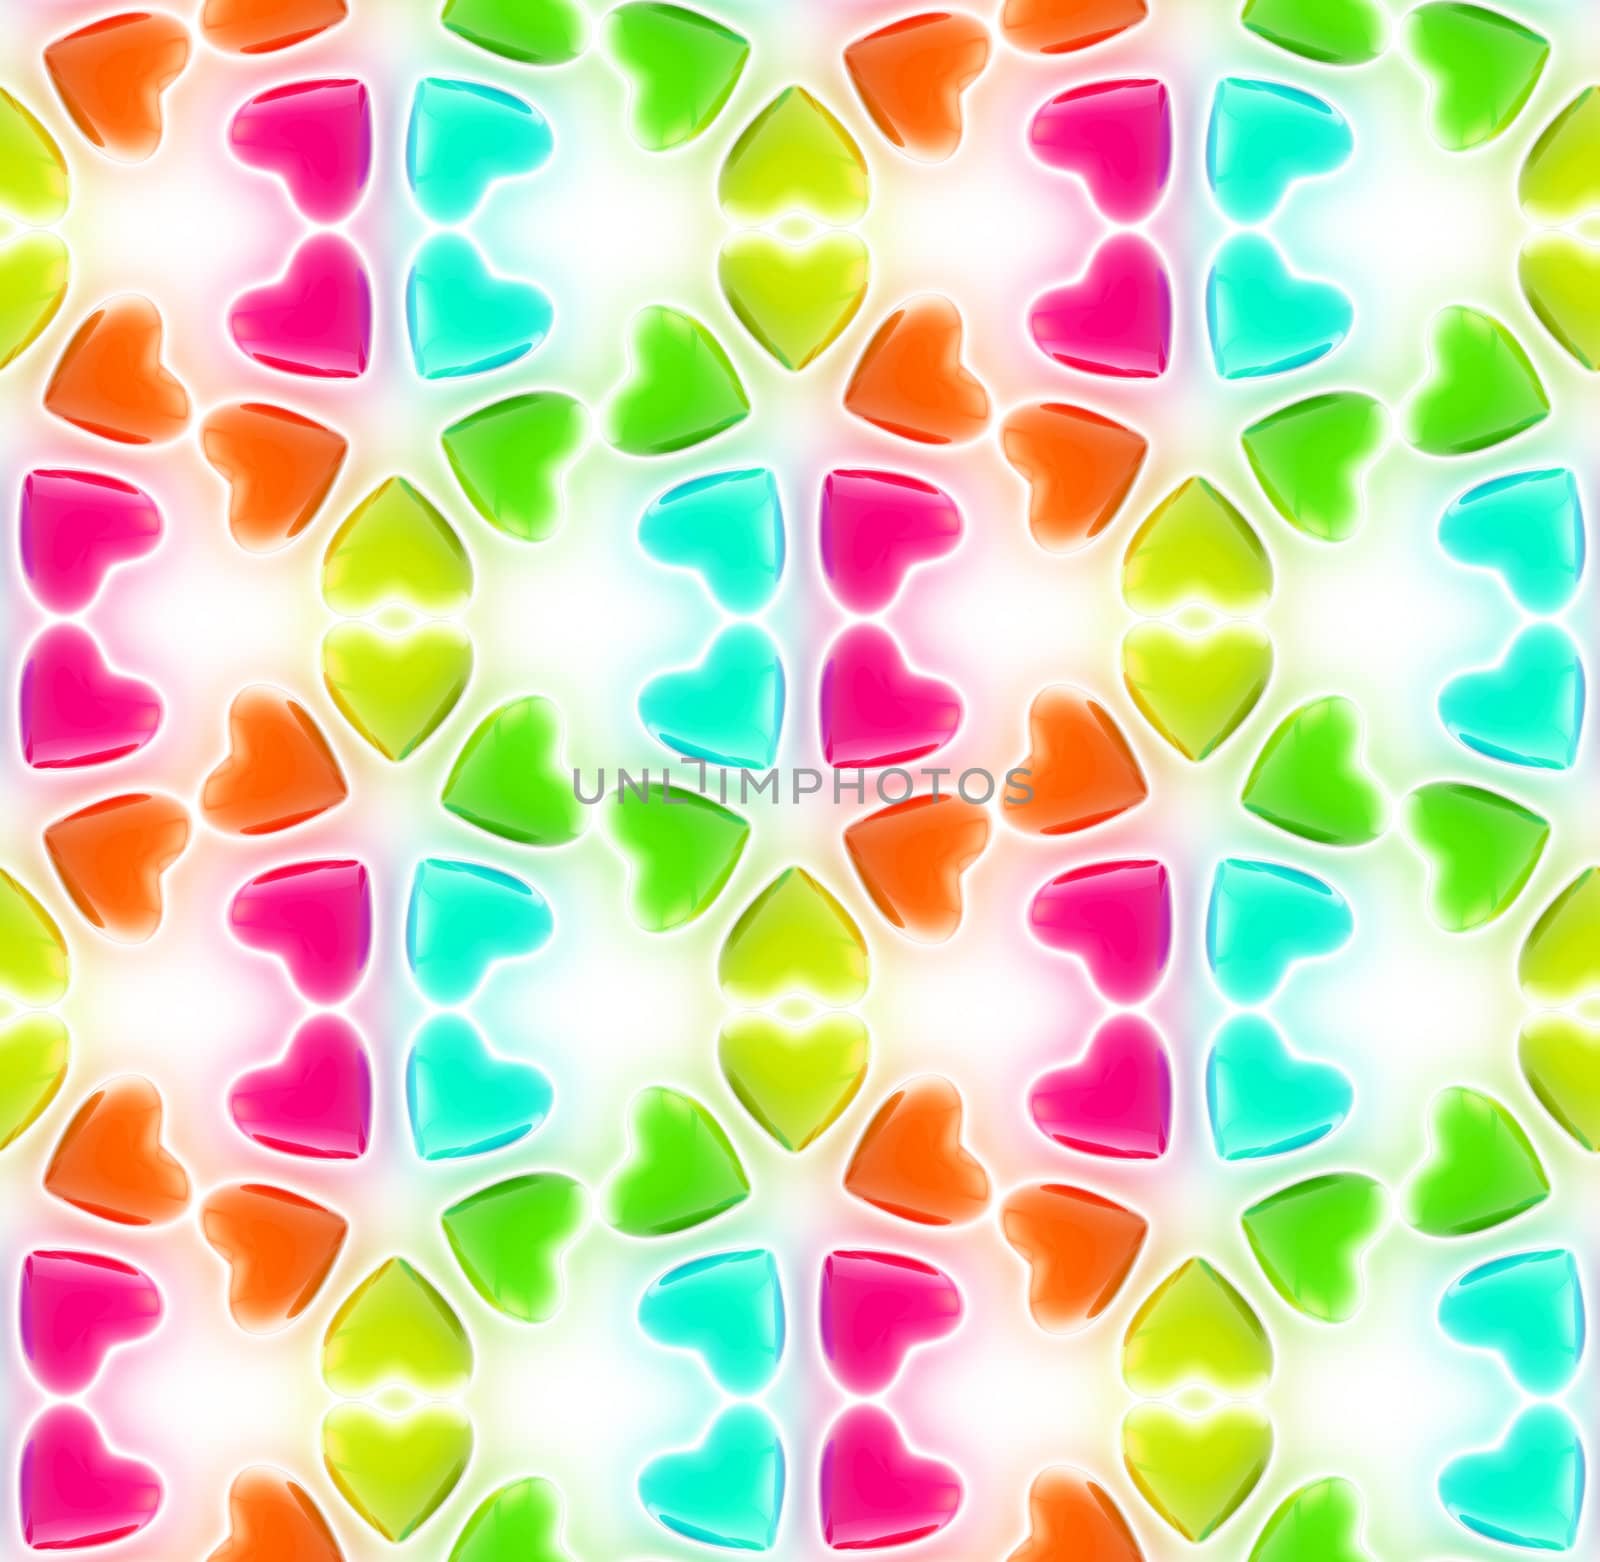 Seamless abstract background made of hearts by nbvf